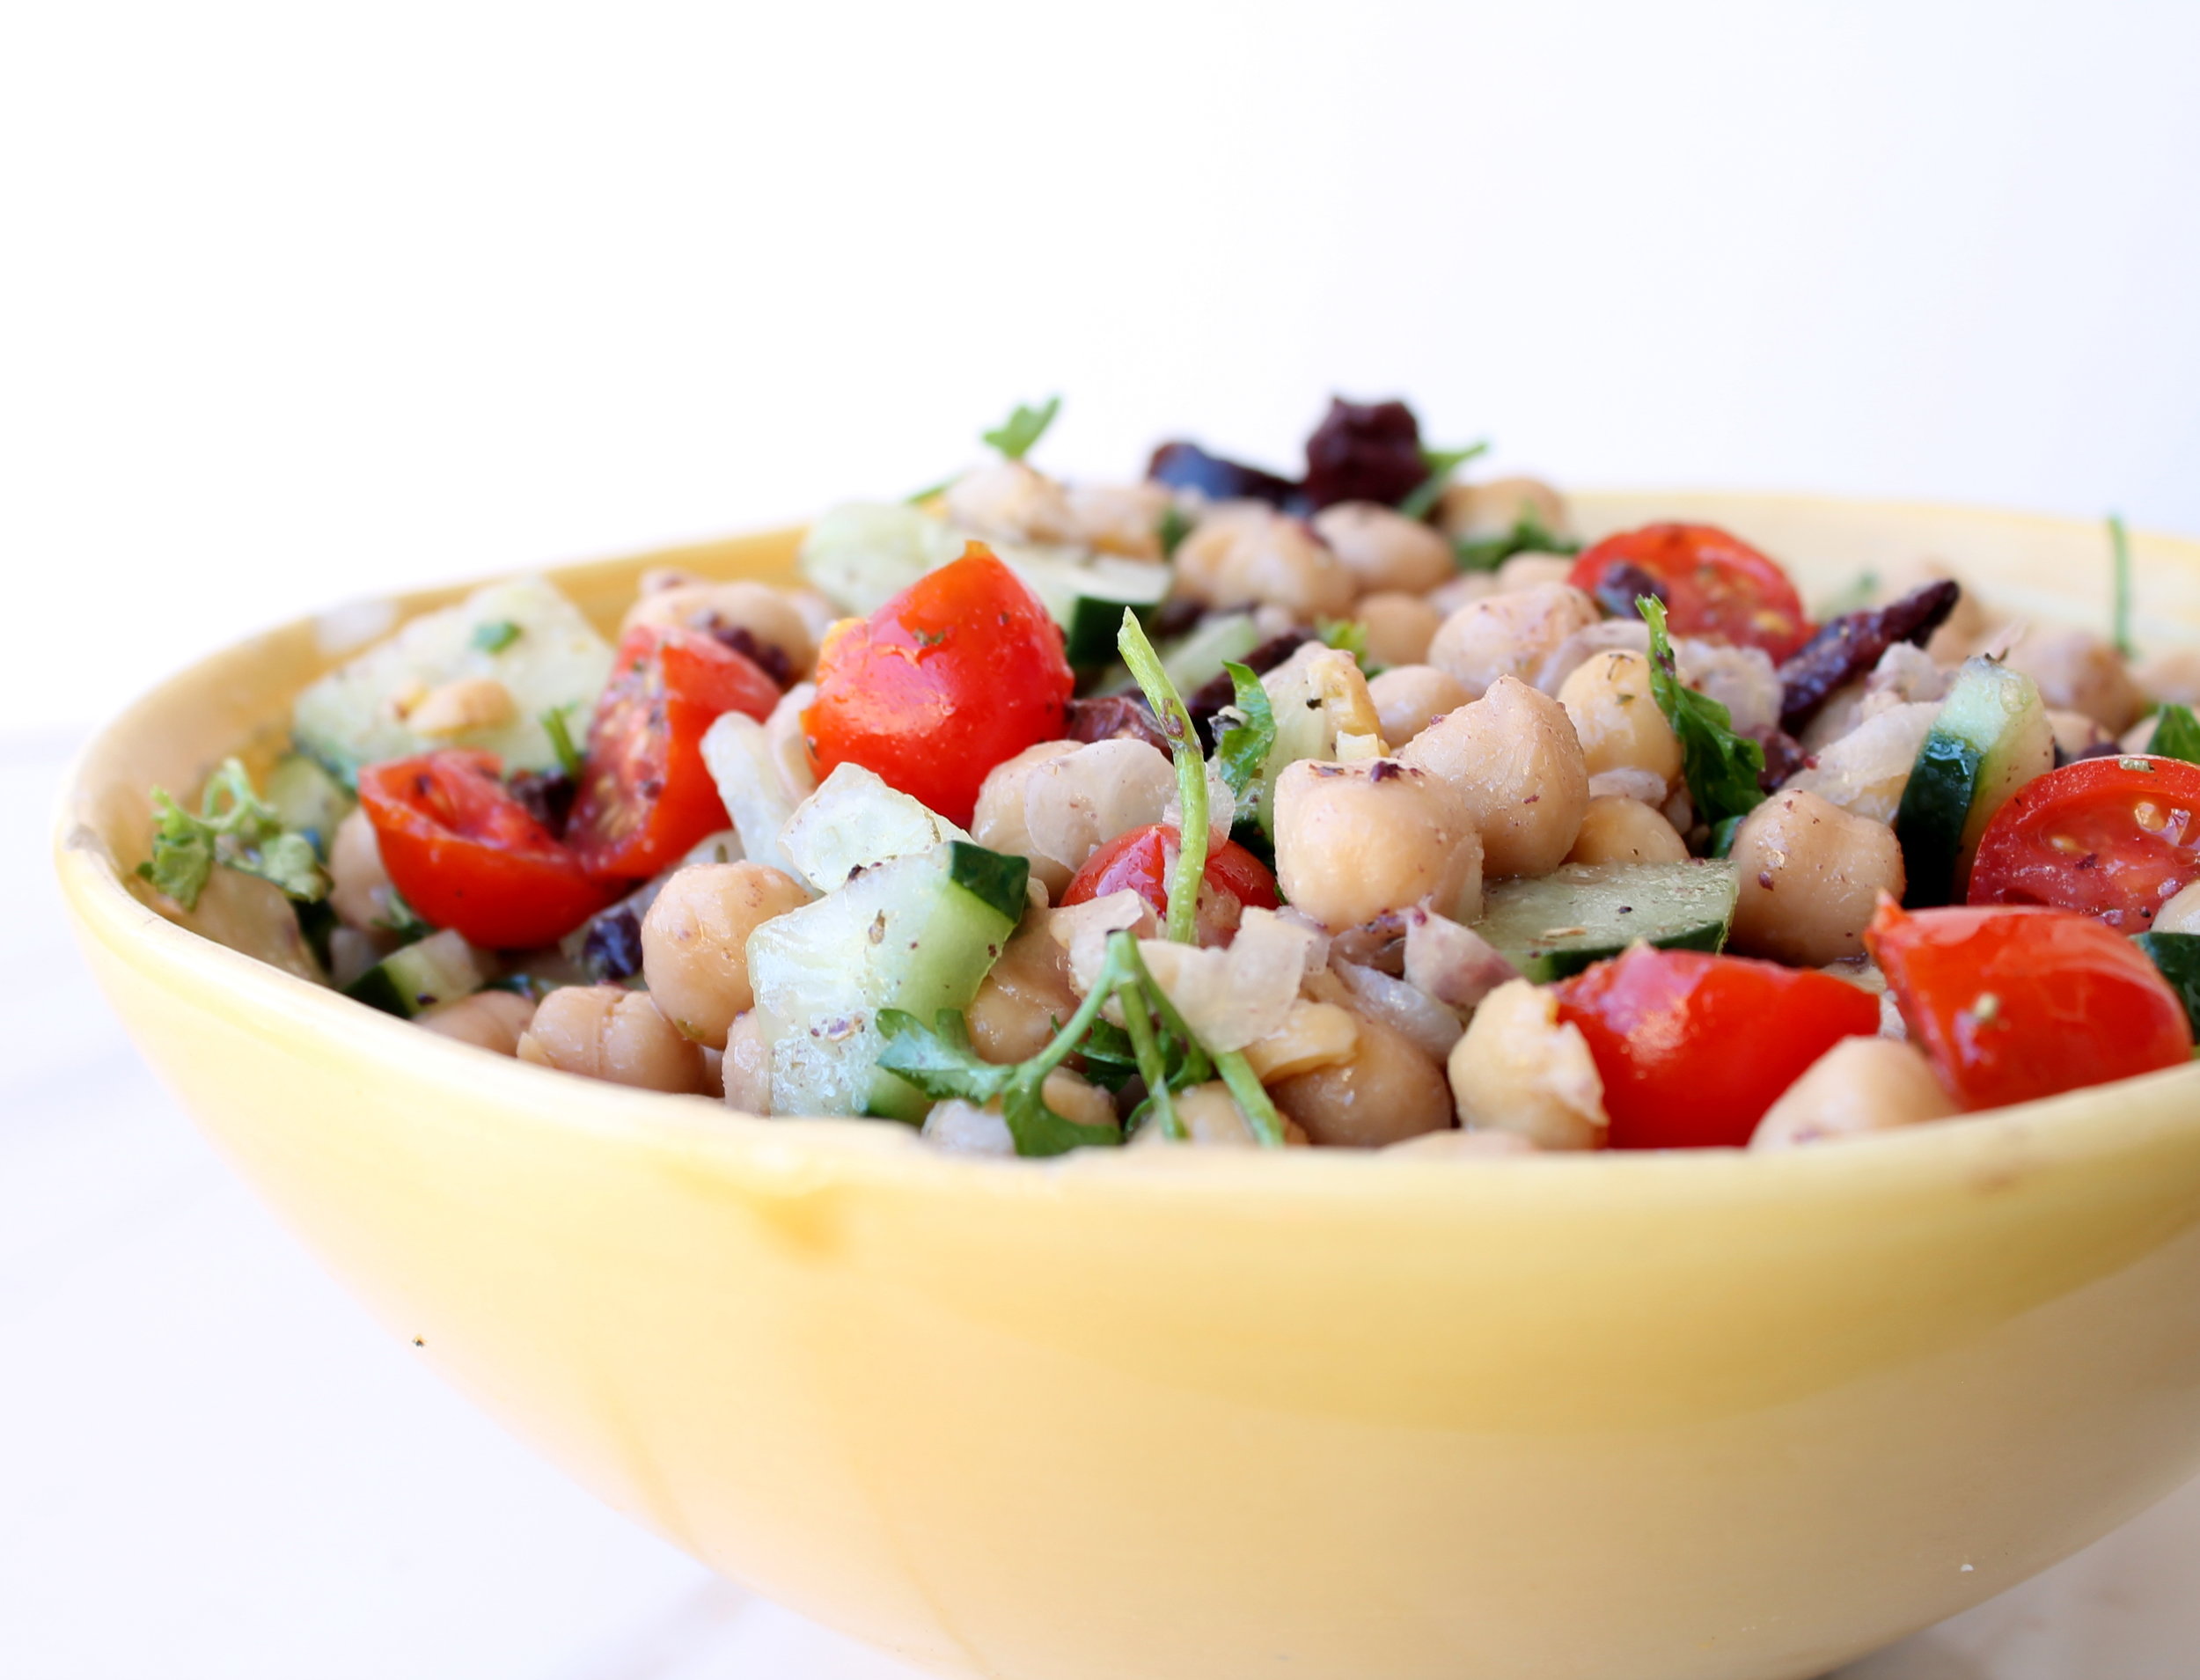 Lunchbox Chickpea Salad is naturally gluten-free, vegan, and very flexible. It requires a bowl, 10 minutes, and you will have lunch for days!